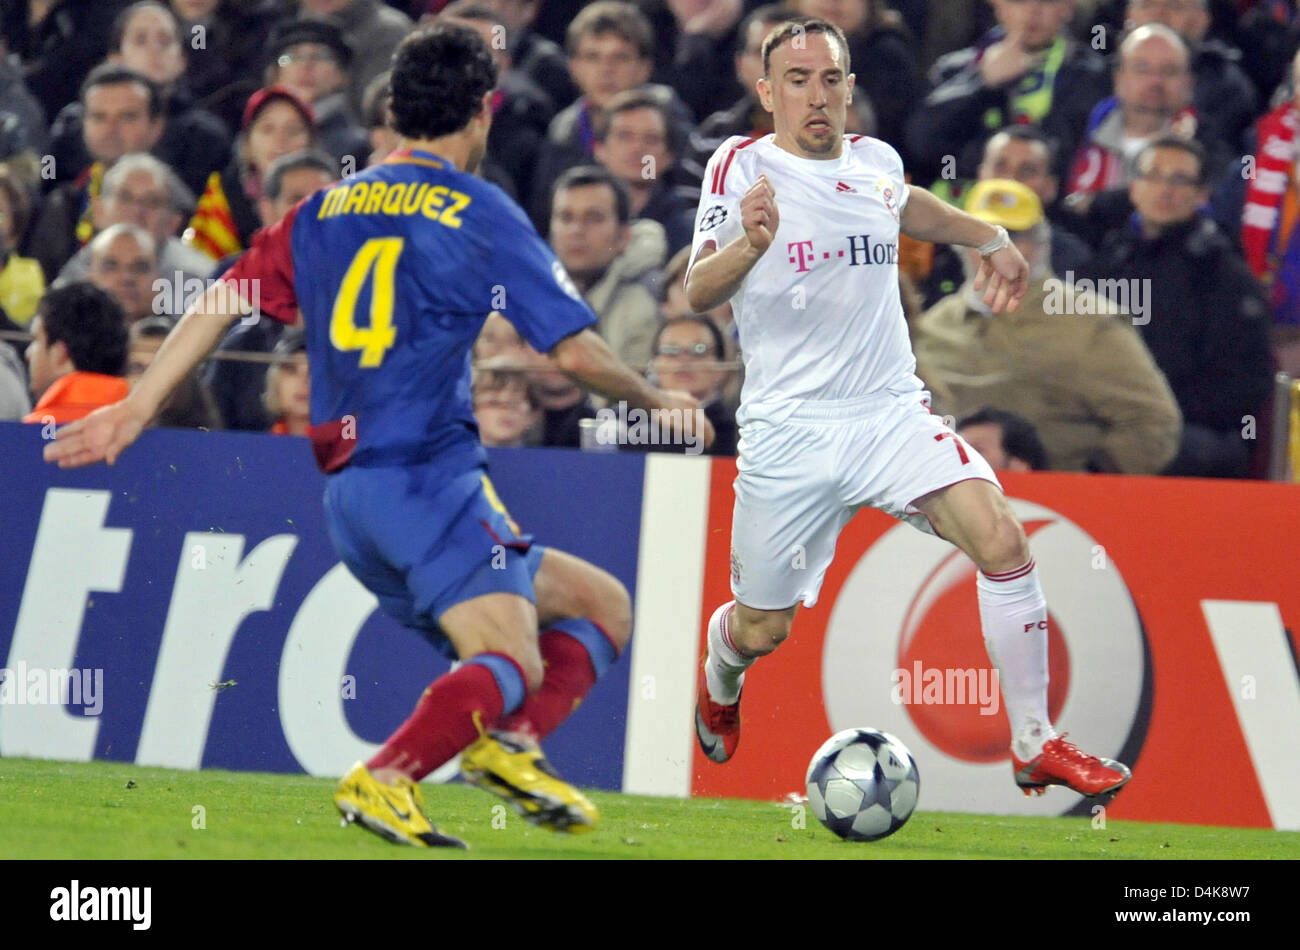 Bayern Munich?s Franck Ribery and Barcelona?s Rafael Marquez (L) vie for the ball during the Champions League quarter finals first leg match Barcelona vs Bayern Munich at Camp Nou stadium in Barcelona, Spain, 08 April 2009. Barcelona defeated Bayern Munich 4-0. The second leg match will take place in Munich on 14 April 2009. Photo: Andreas Gebert Stock Photo